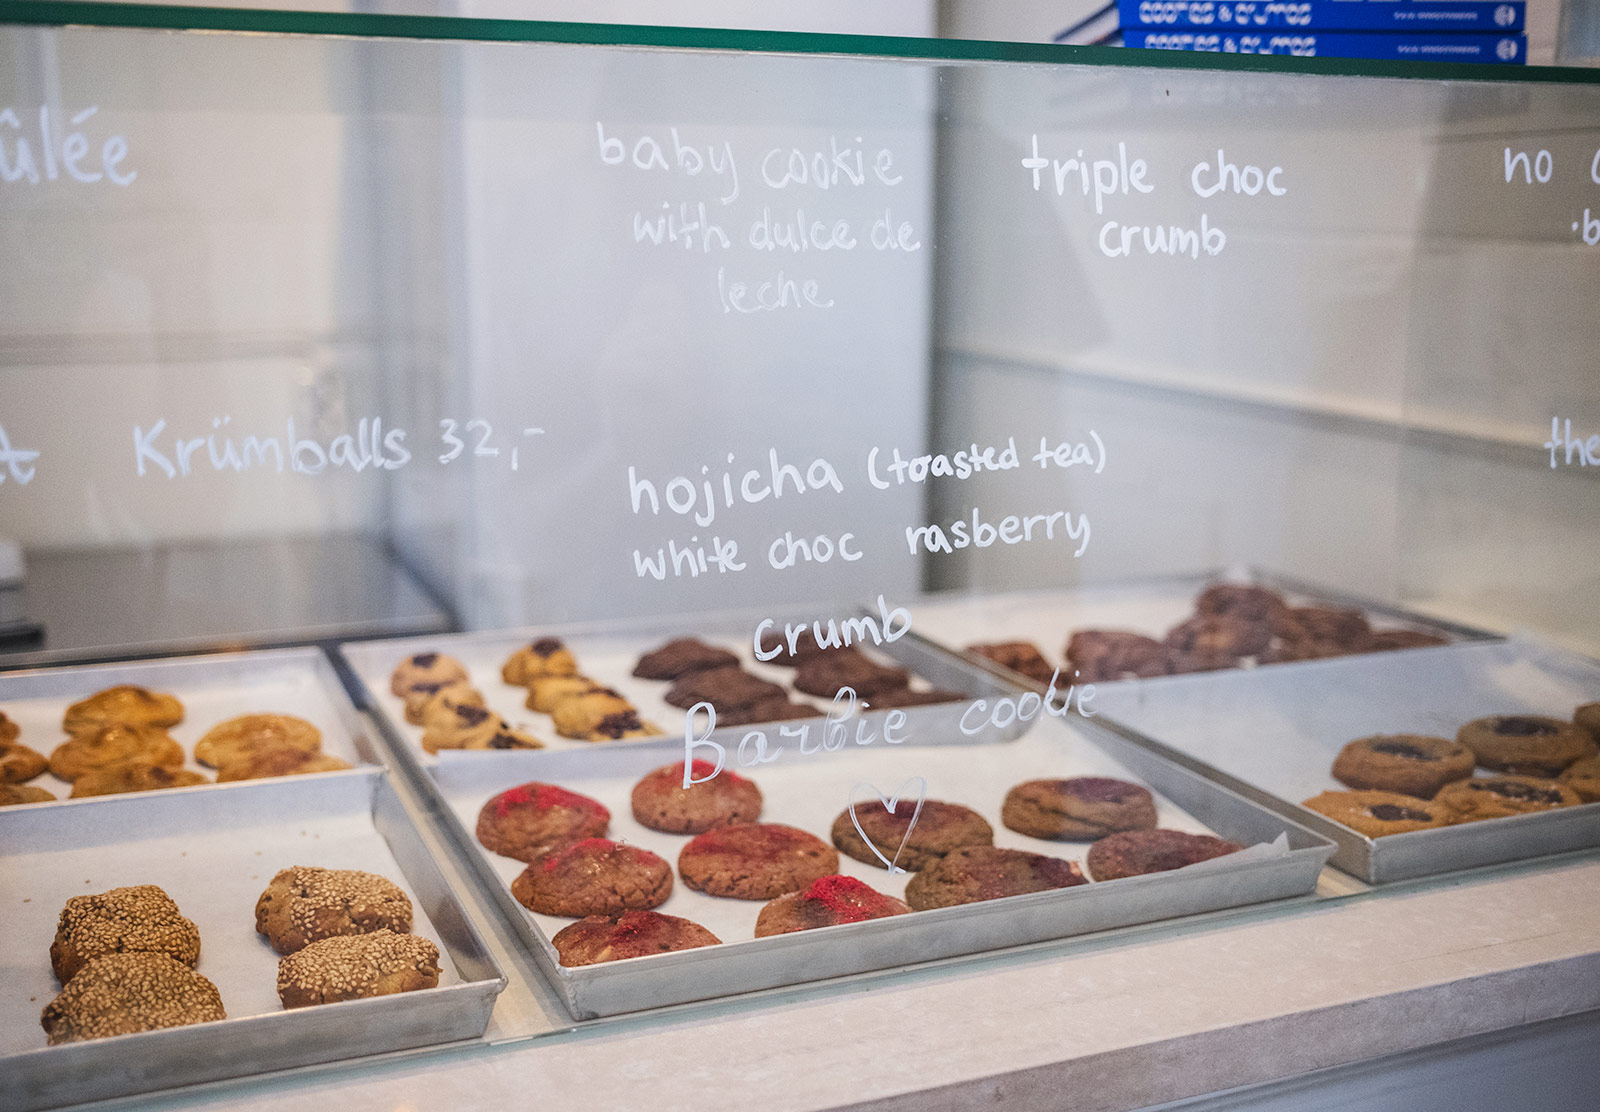 Cookie names written on glass